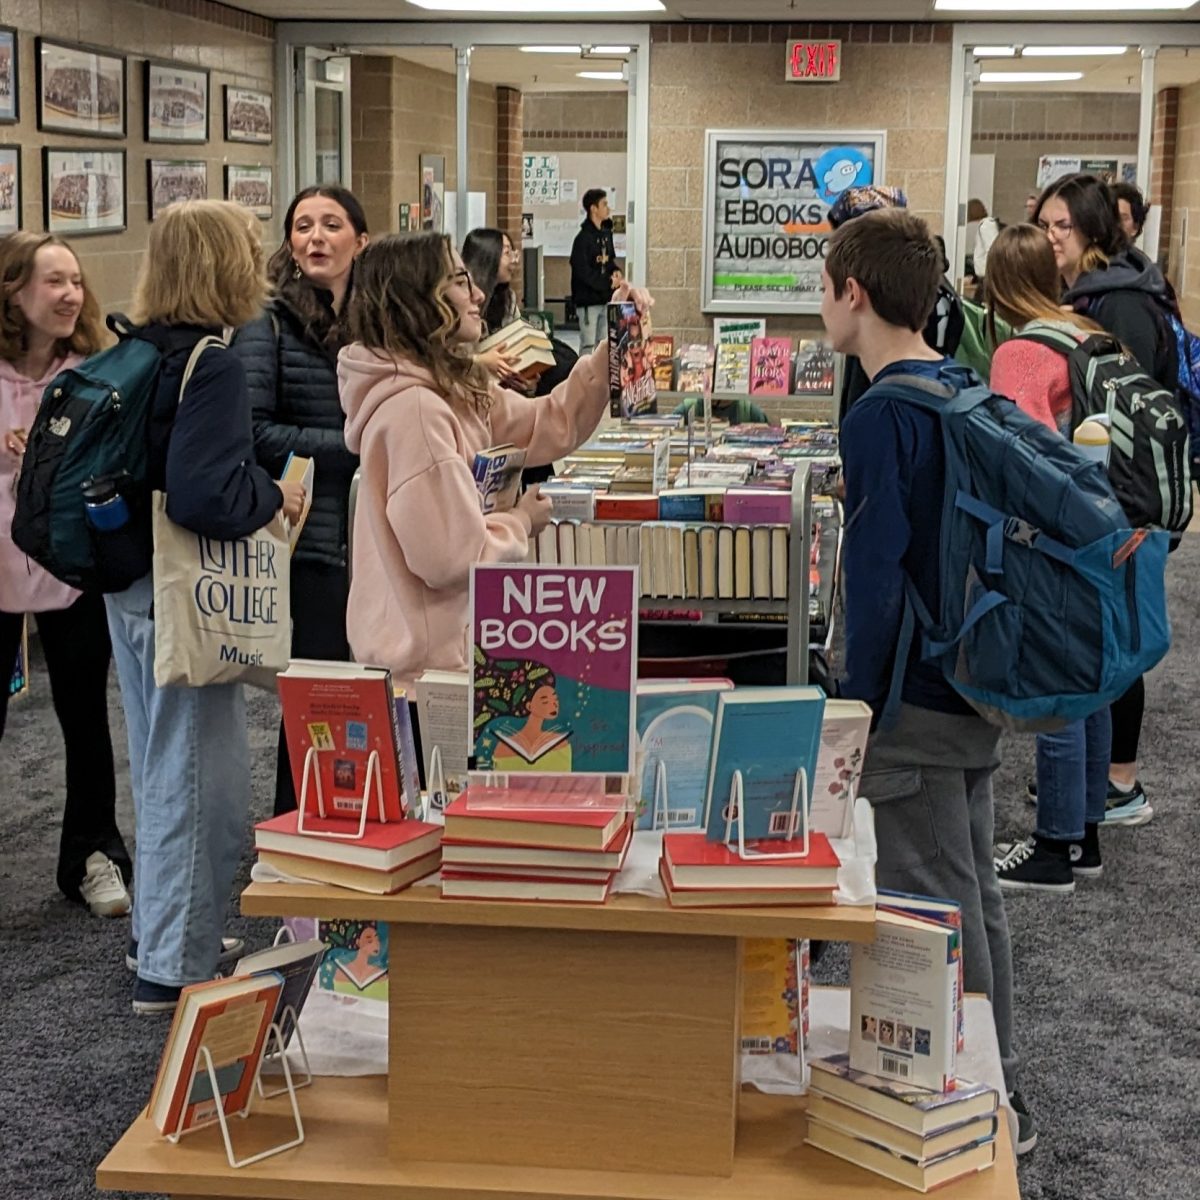 The+first-ever+book+swap+was+a+success%2C+with+many+students+rushing+into+the+library+early+in+the+morning+to+trade+out+their+books.+%E2%80%9CThis+is+all+new%2C%E2%80%9D+librarian+Amanda+Gehrke+said.+%E2%80%9CAnd+its+not+just+kids+participating%2C+its+teachers+too%2C+which+is+great.+Theyre+bringing+home+books+for+their+kids%2C+and+so+its+really+promoting+literacy+for+everyone.%E2%80%9D